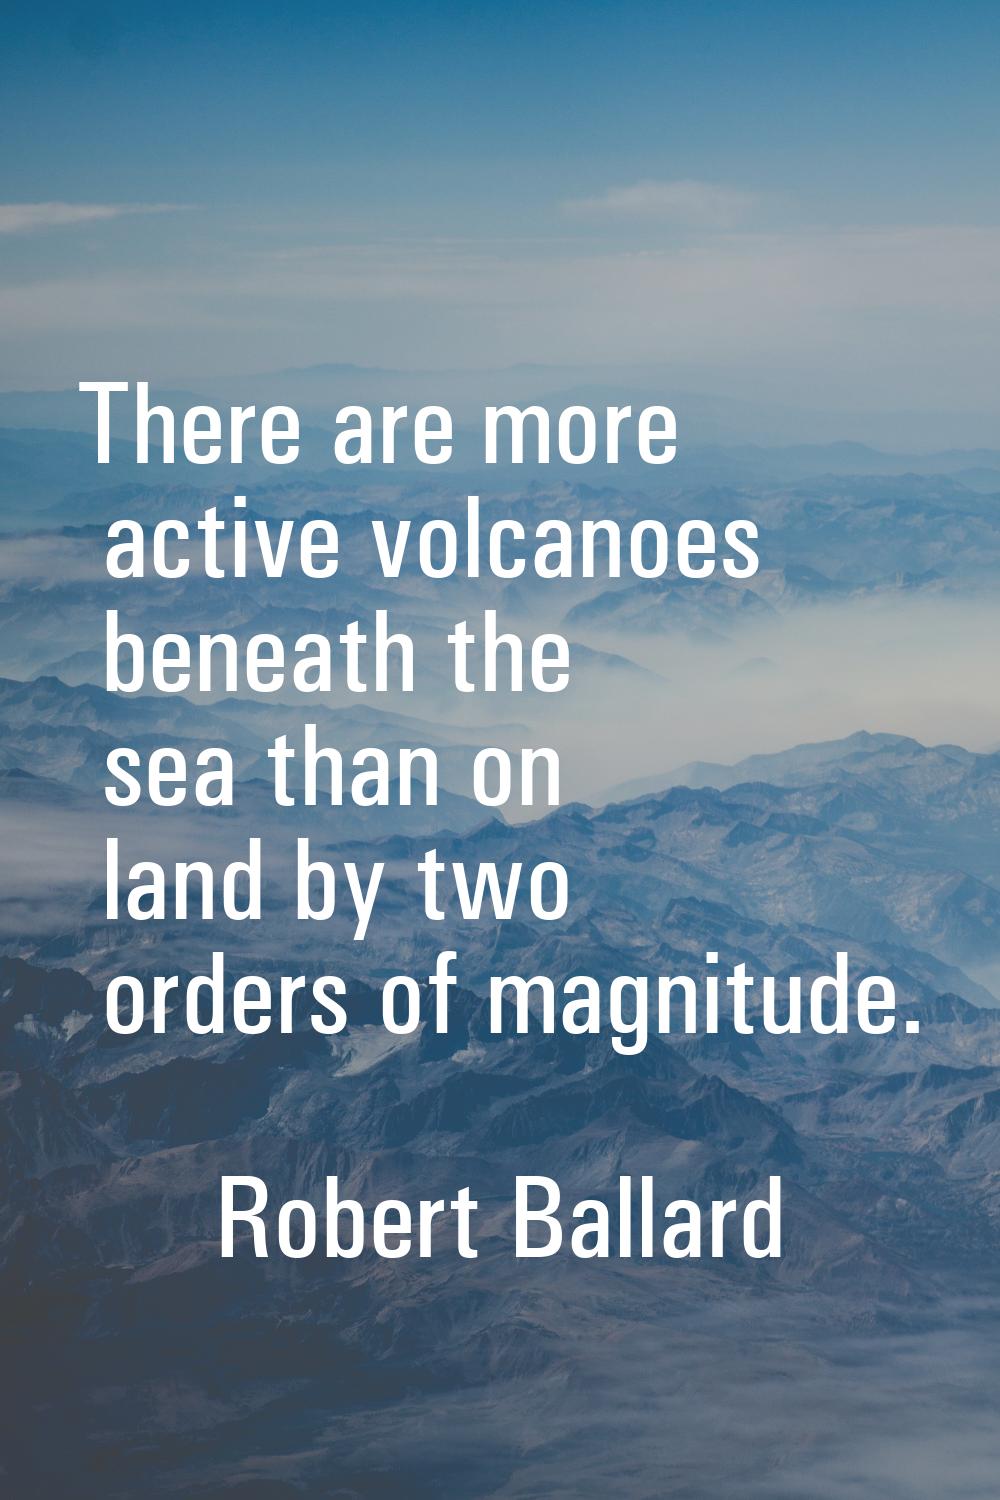 There are more active volcanoes beneath the sea than on land by two orders of magnitude.